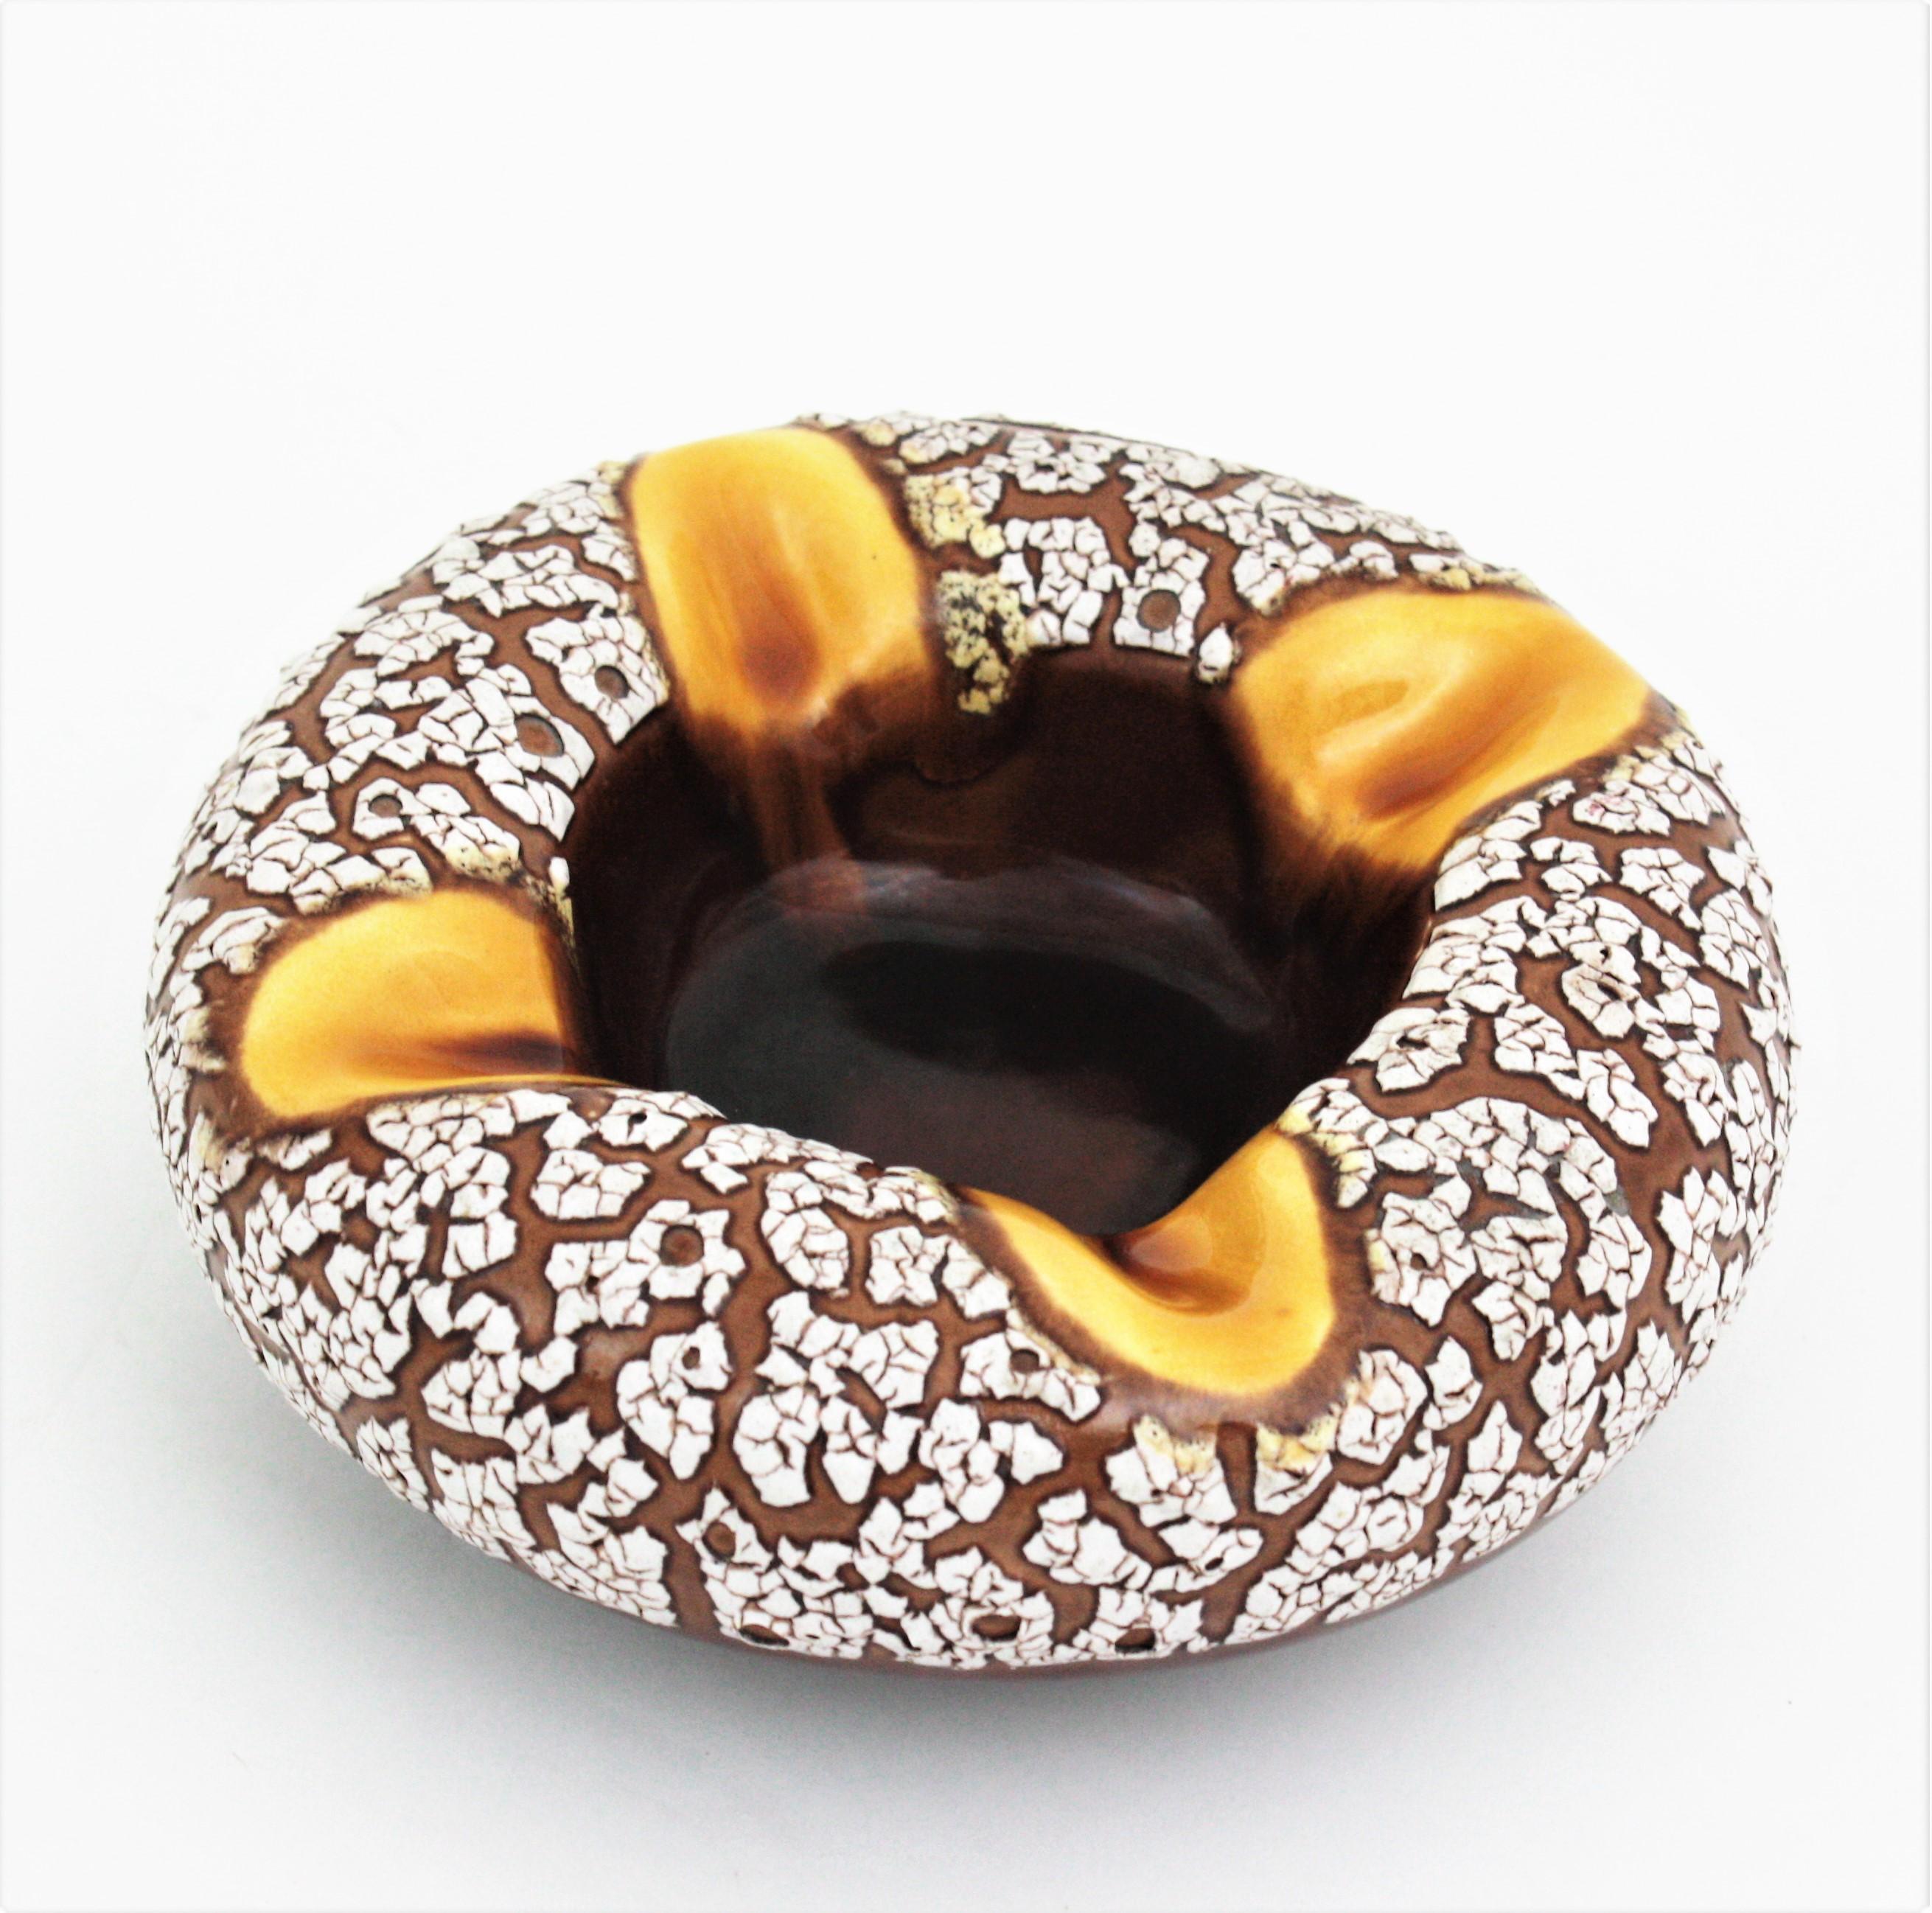 Mid-Century Modern Vallauris Yellow White Brown Ceramic Fat Lava Round Ashtray / Bowl, 1950s For Sale